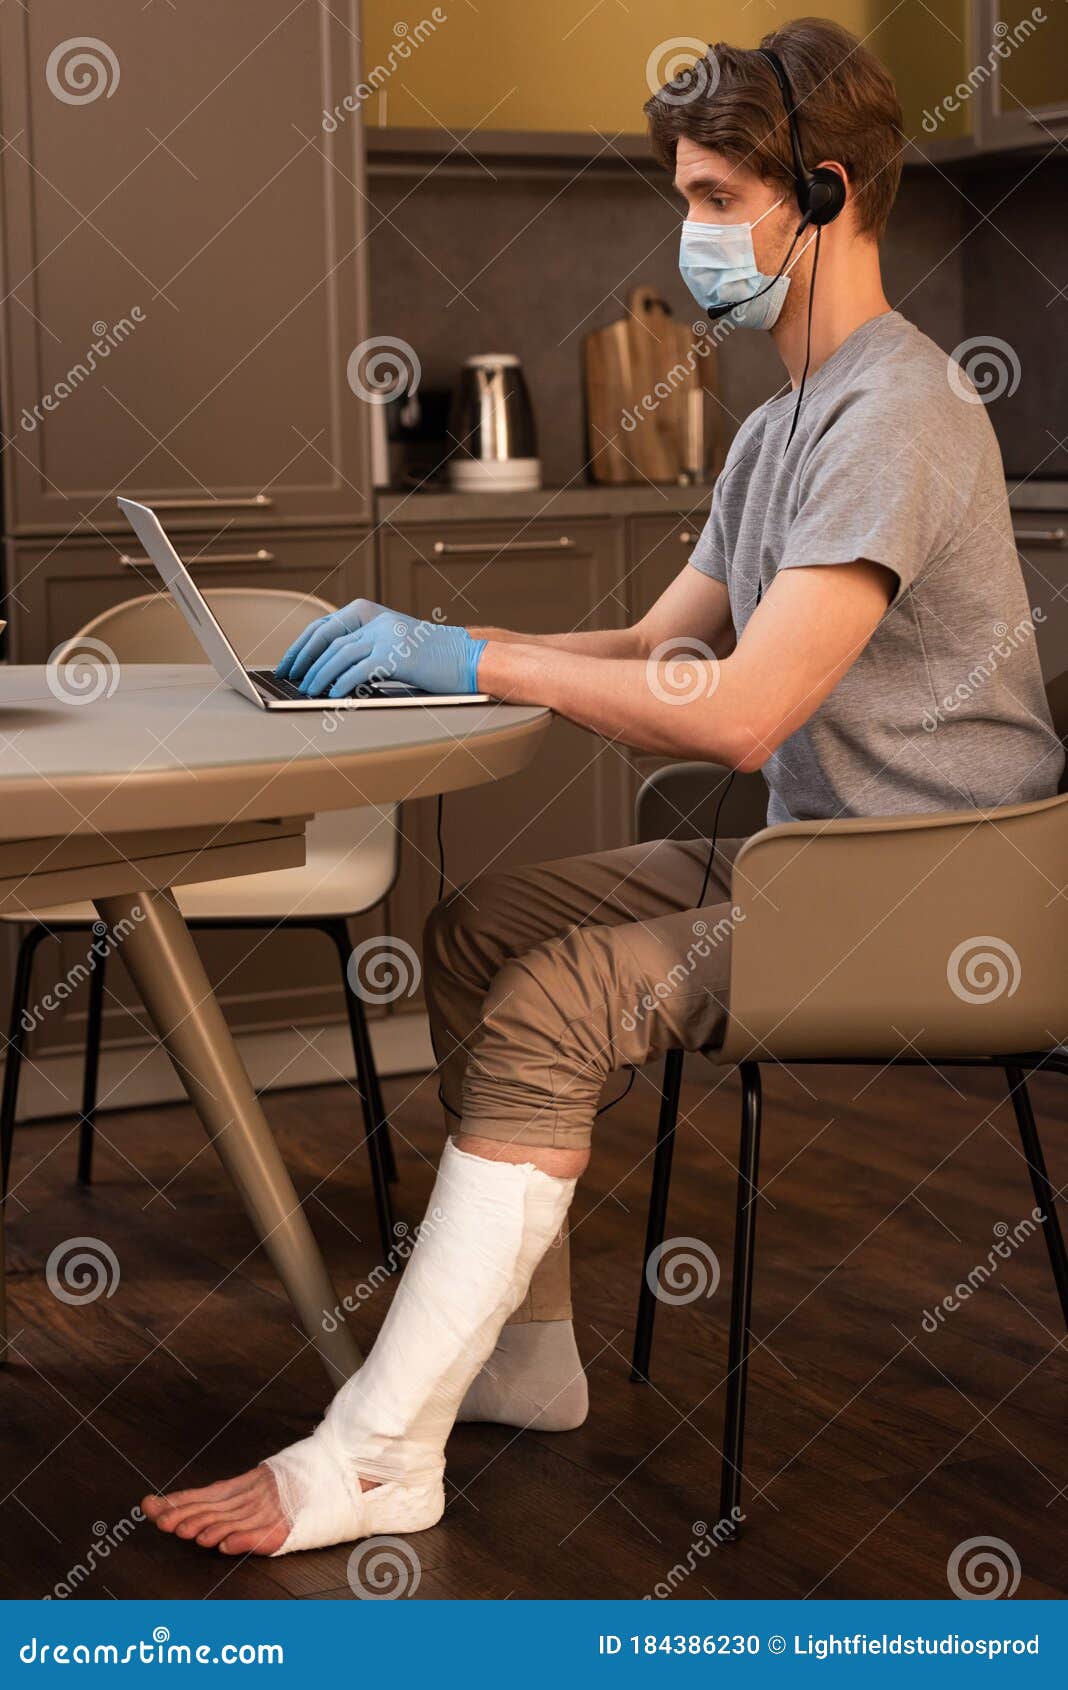 side view of teleworker in medical